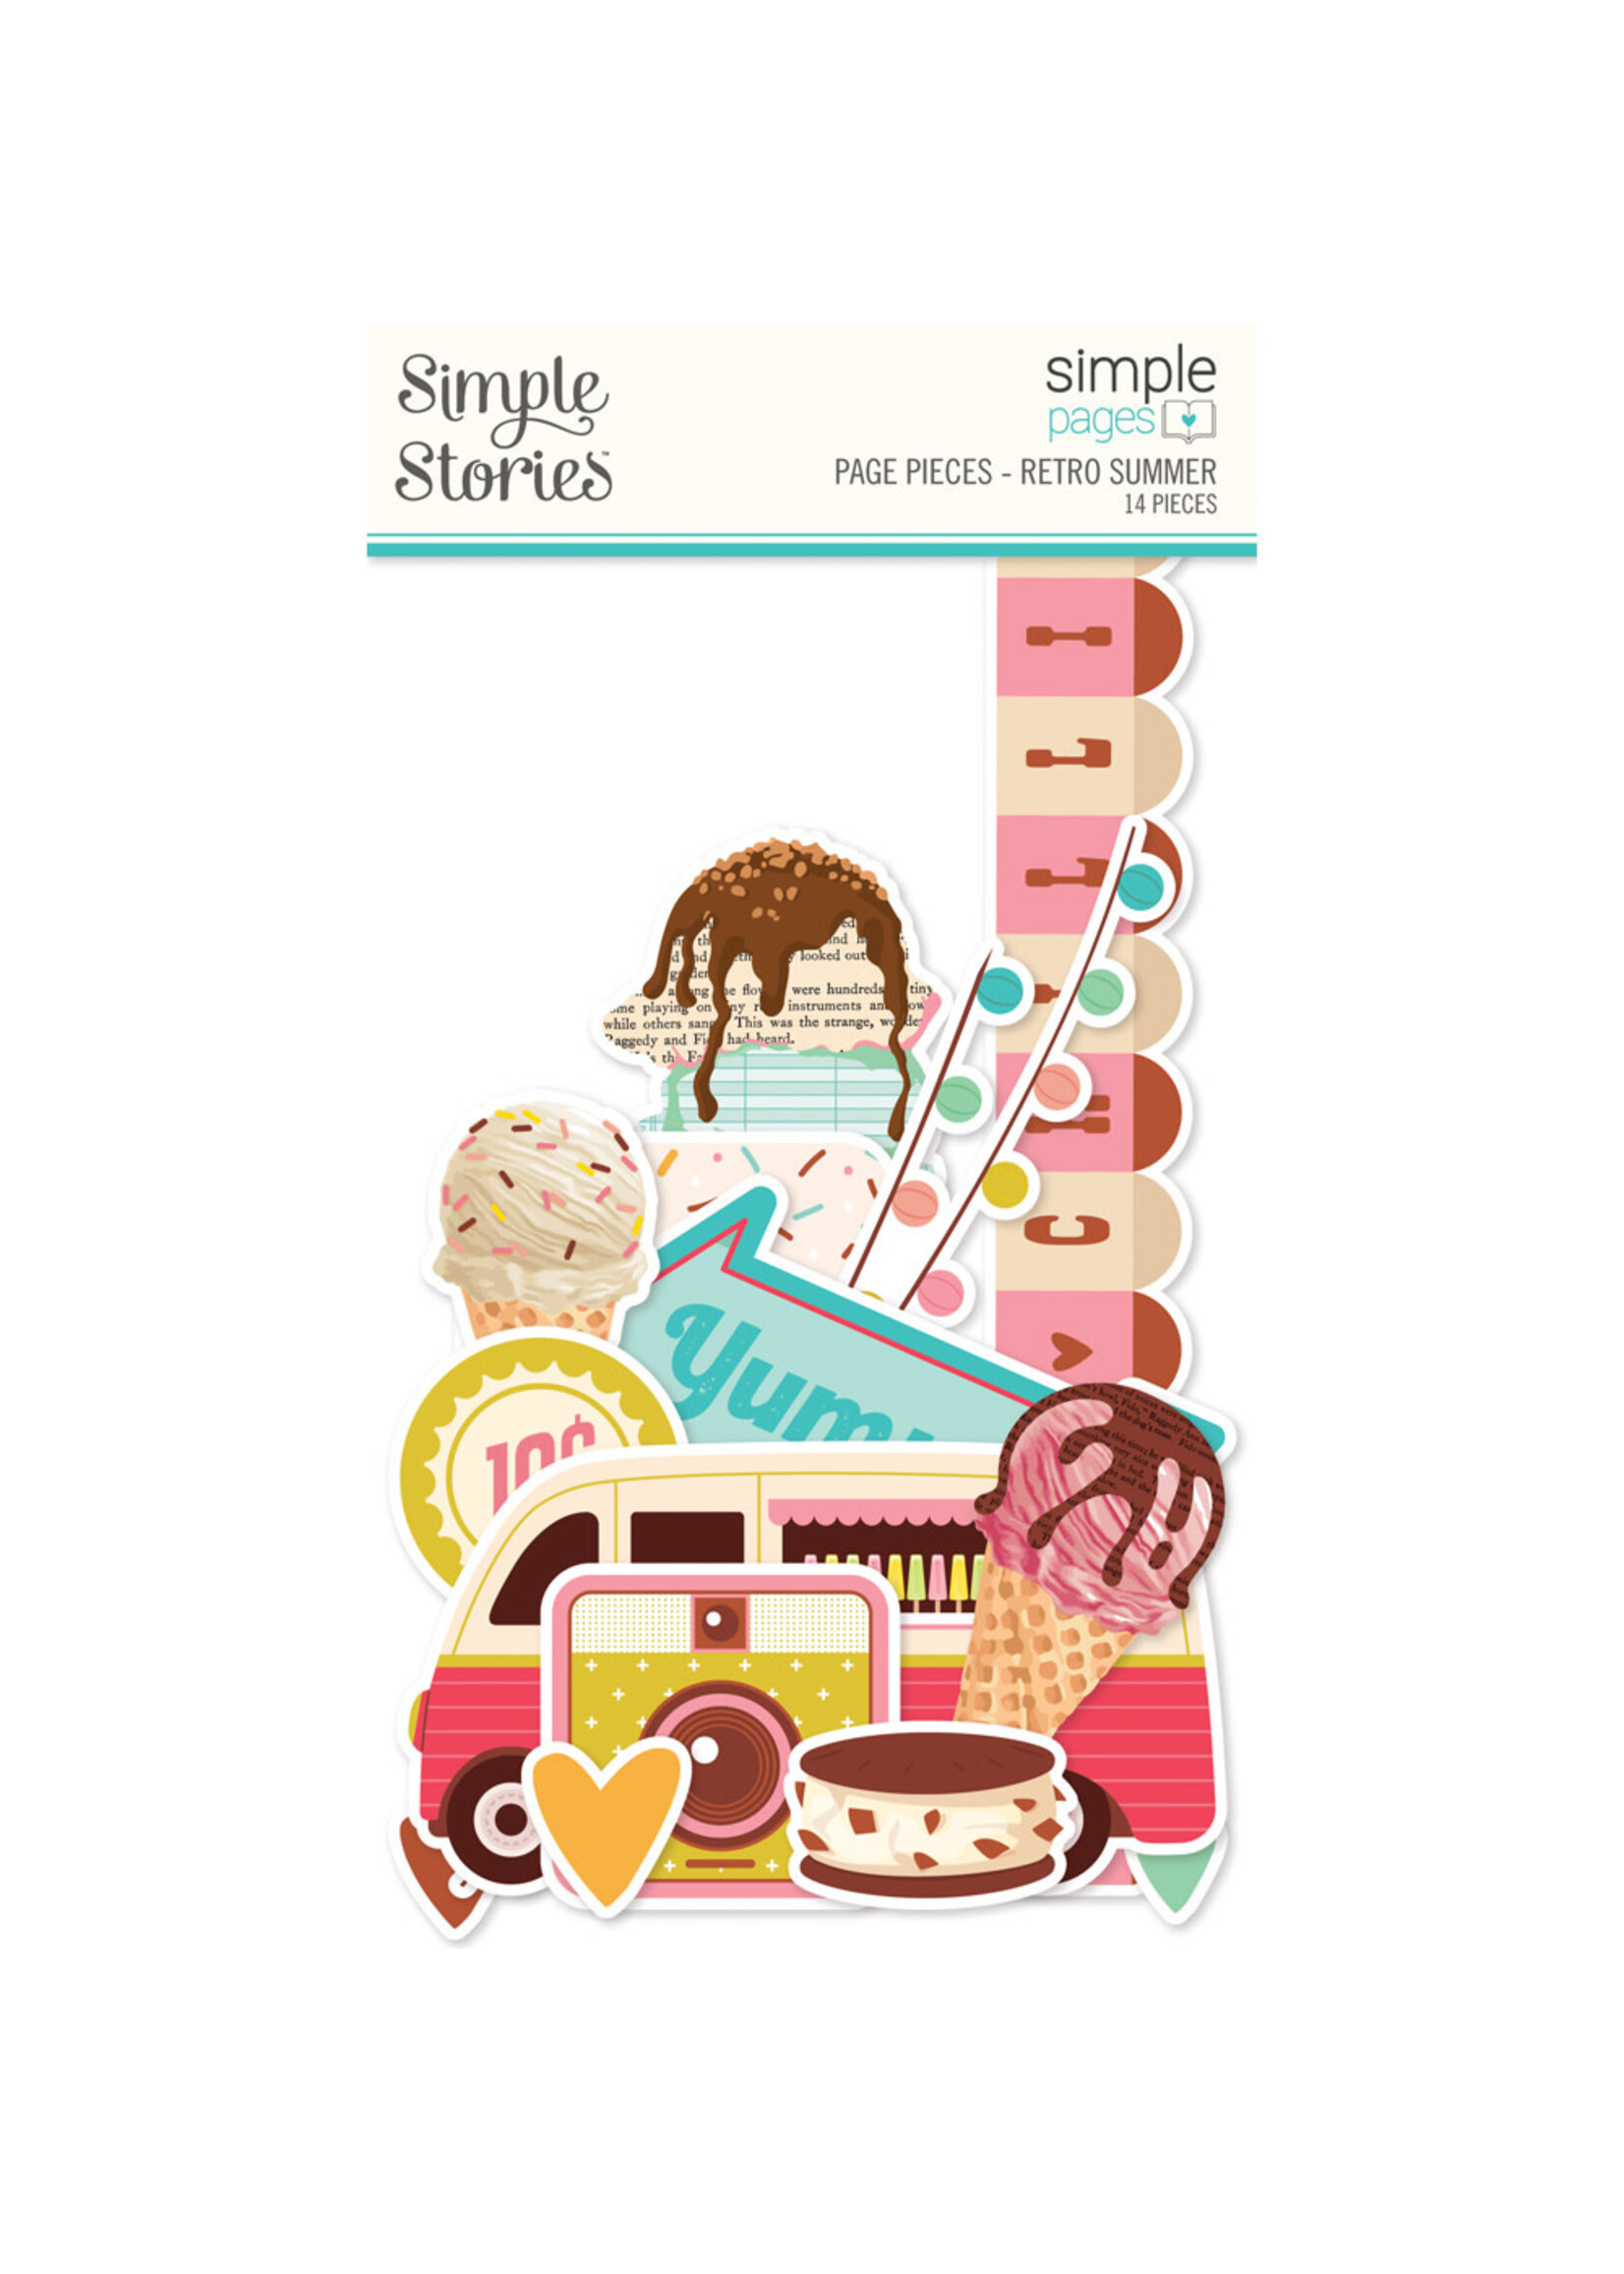 Simple Stories Retro Summer - Simple Pages Page Pieces